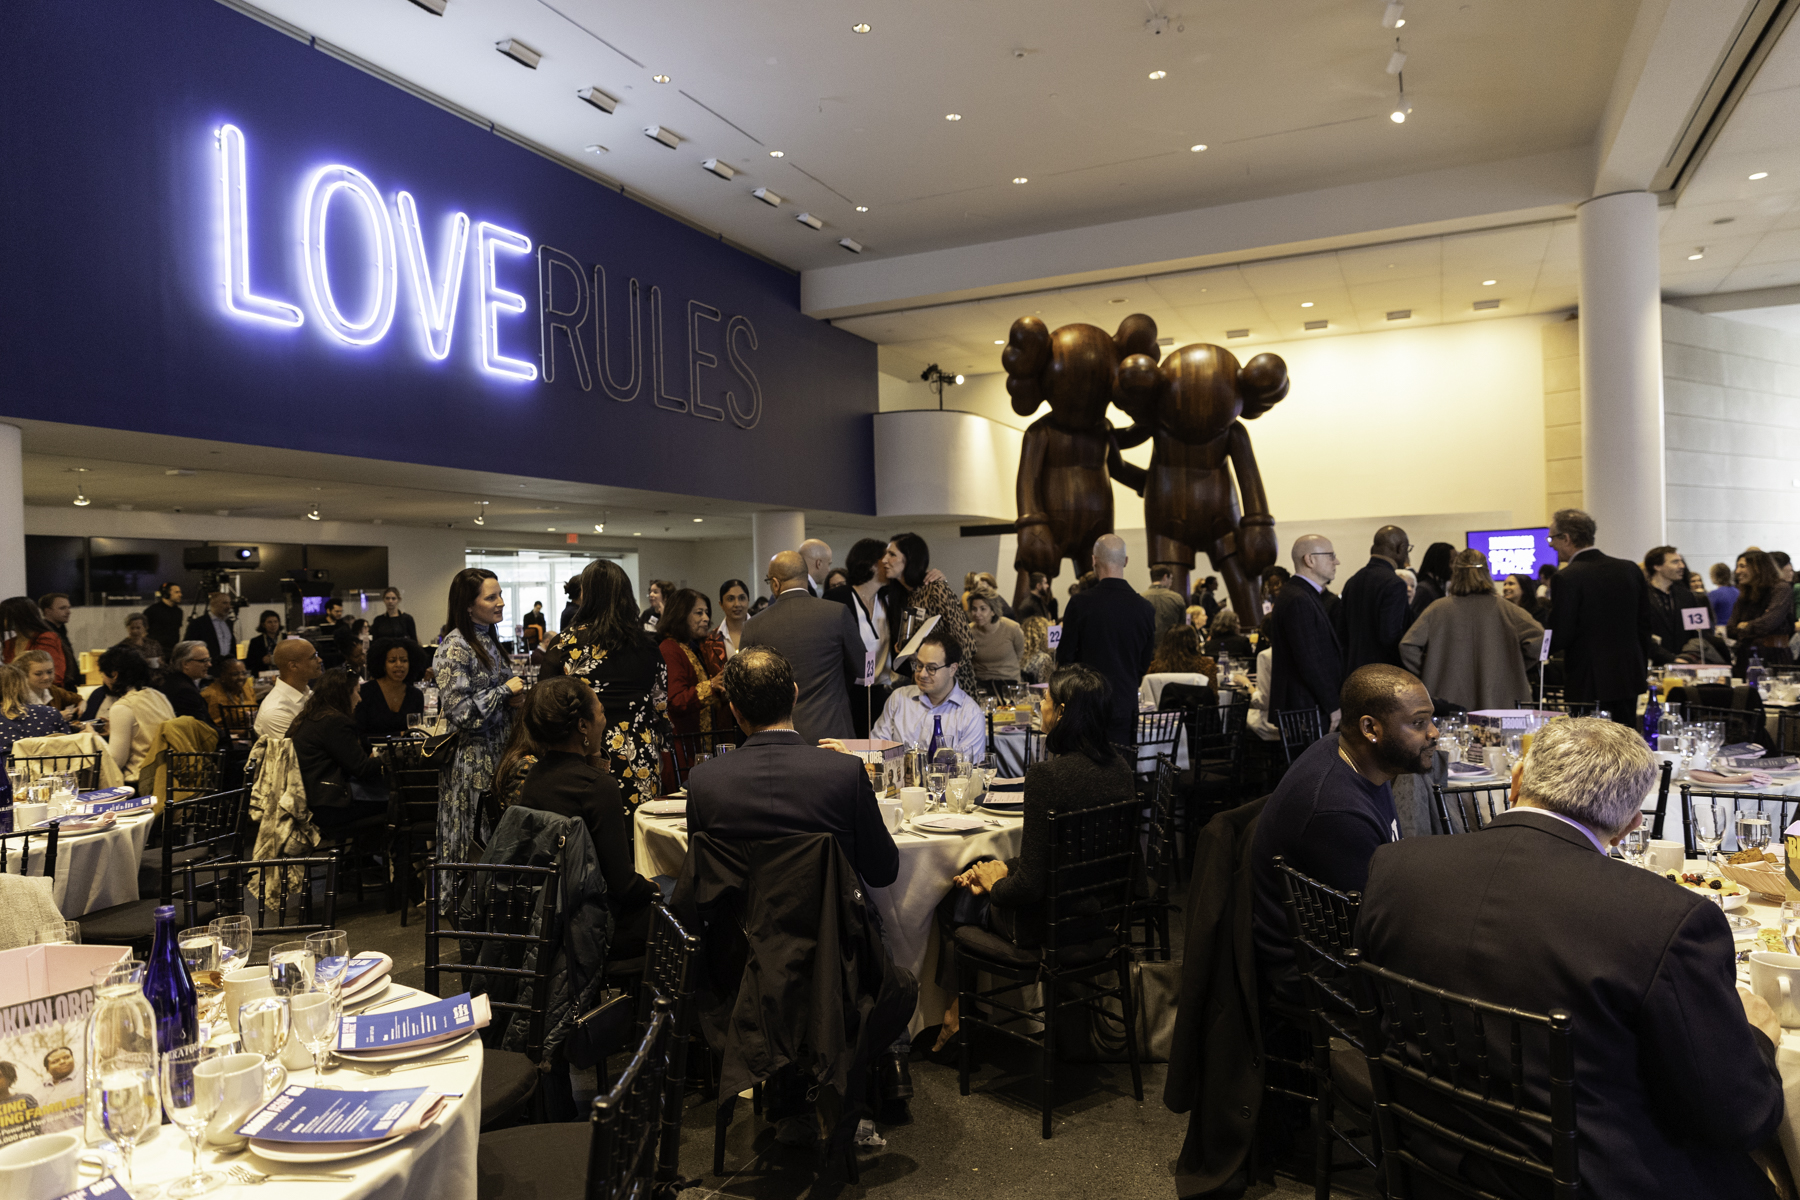 Guests mingling at a formal event with tables set for dinner and a "love rules" neon sign in the background.